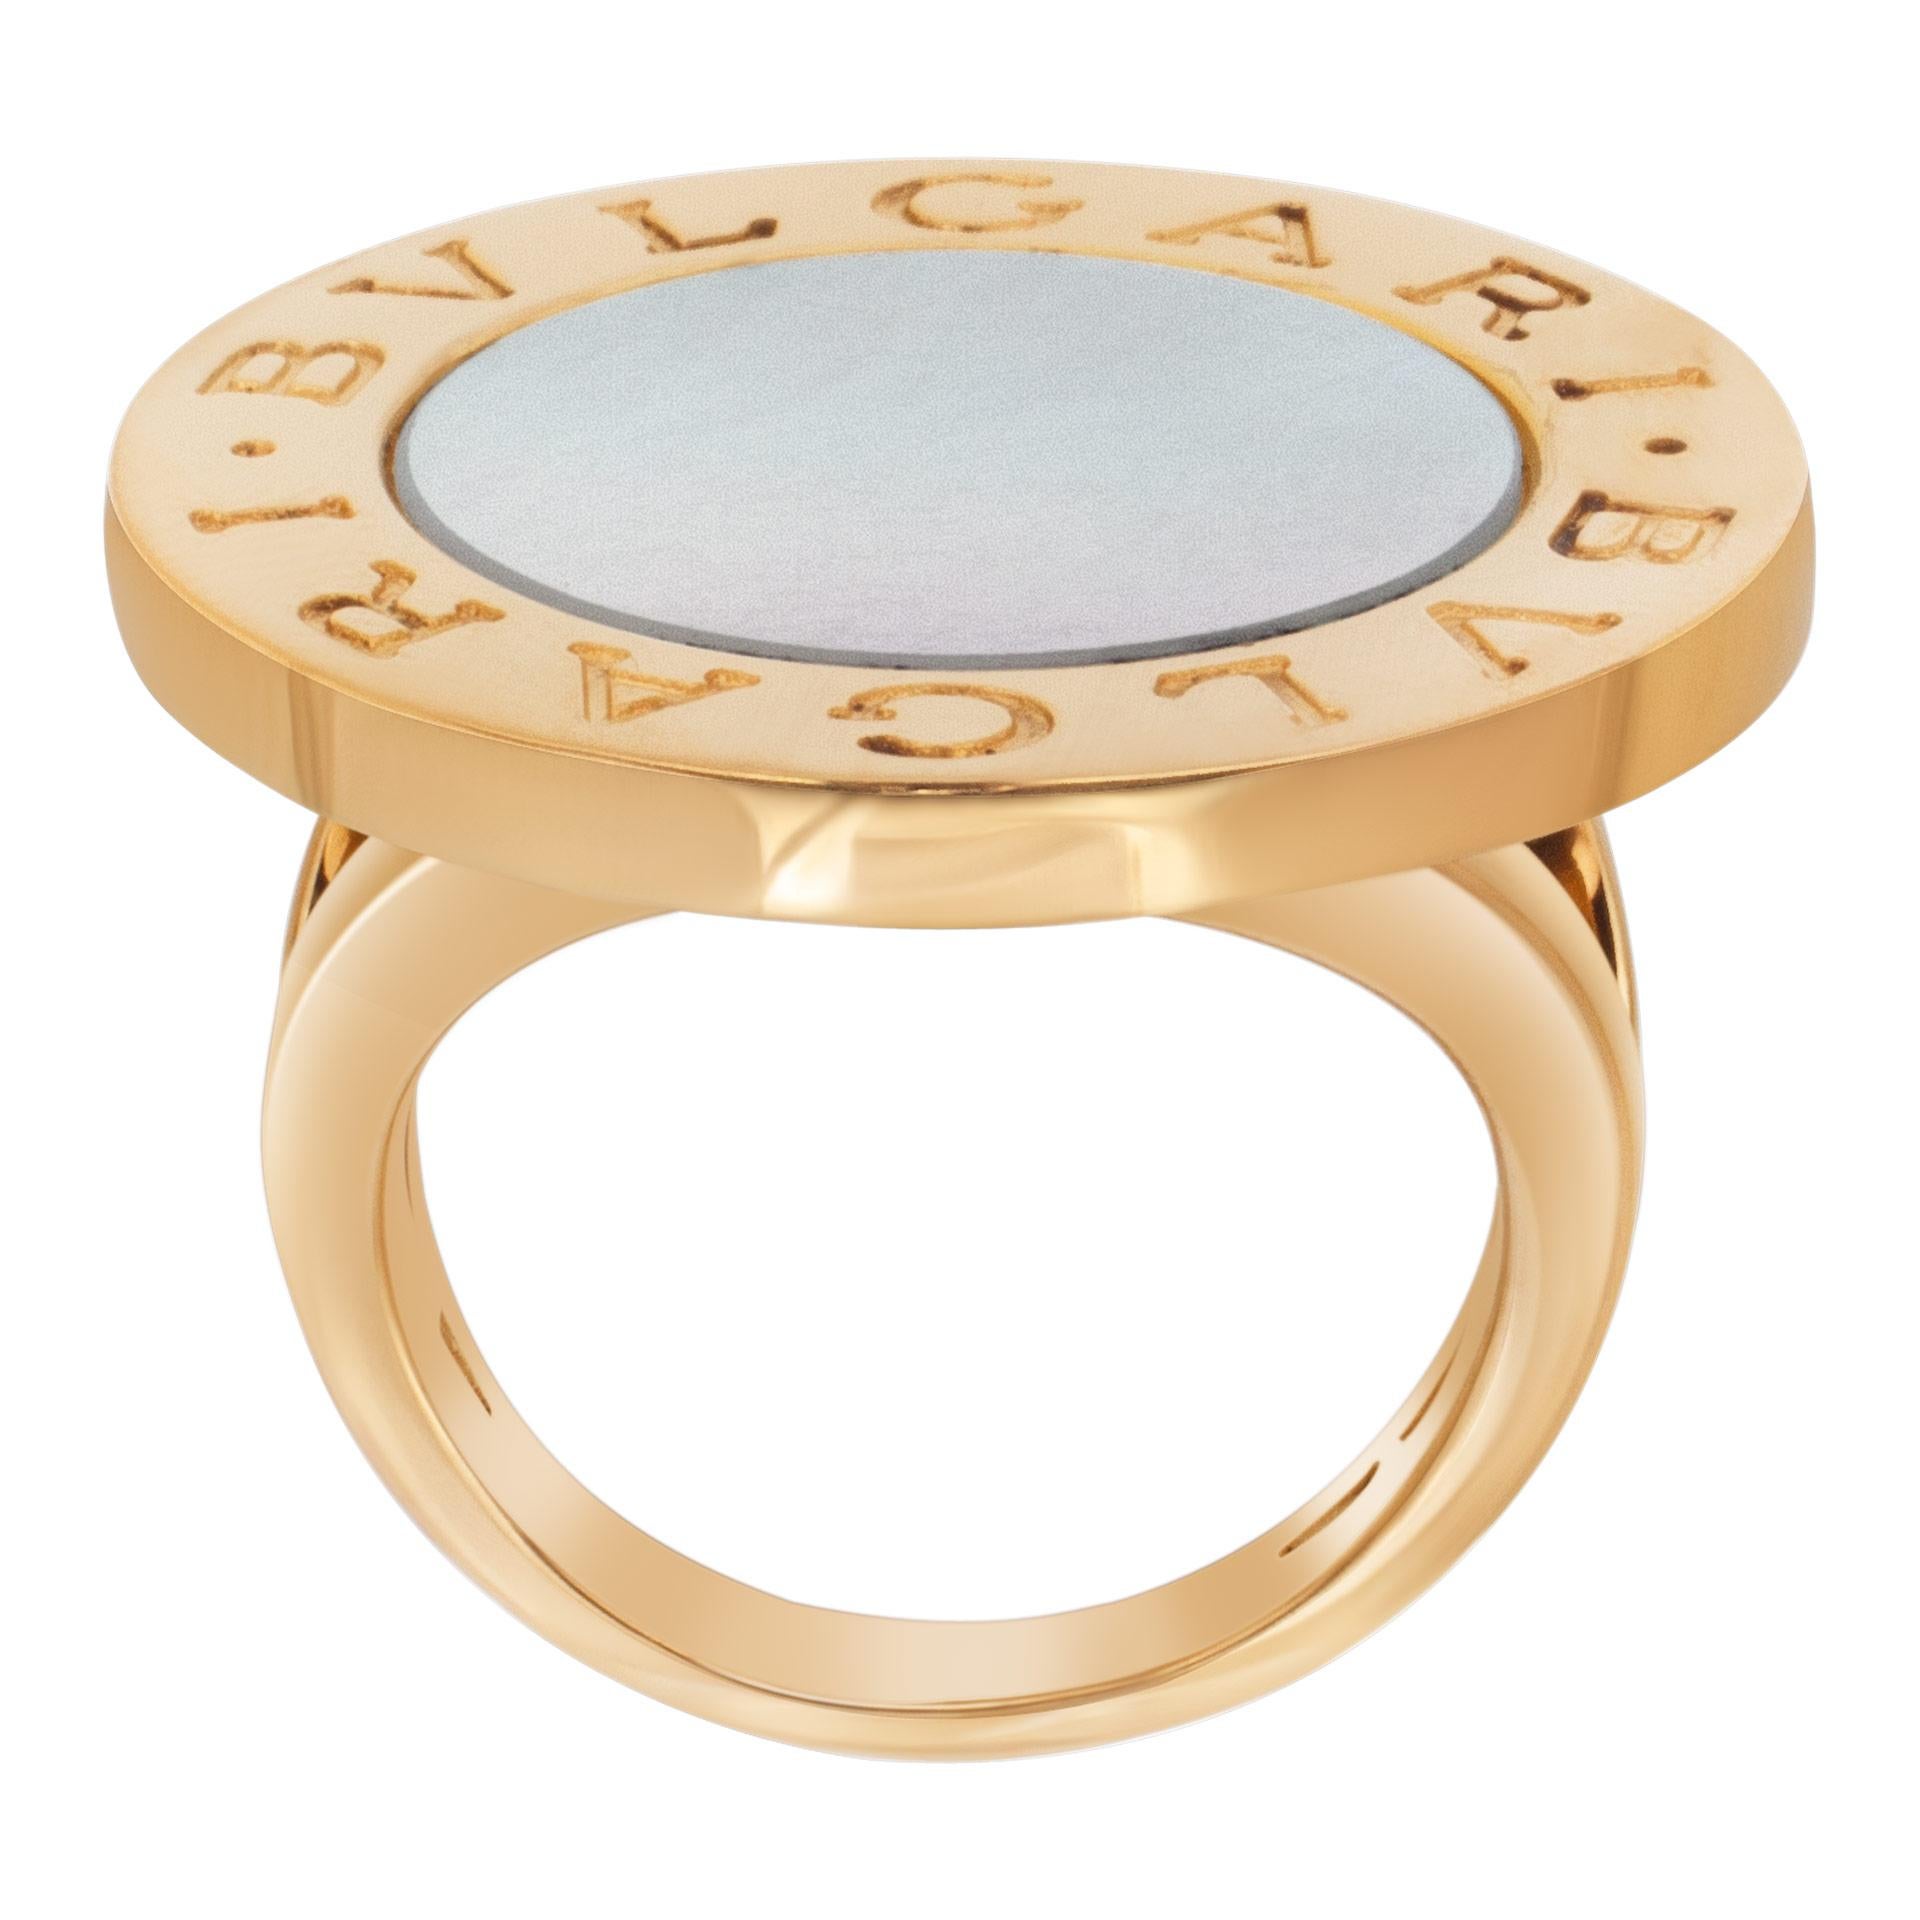 ESTIMATED RETAIL $3250 - YOUR PRICE $2250 - 100% AUTHENTIC, FACTORY ORIGINAL Bvlgari Bvlgari ring with  Mother of Pearl inlay in 18k gold. Top of the ring measures 24.5mm. Shank of ring measures 3mm. Size 5.25. 